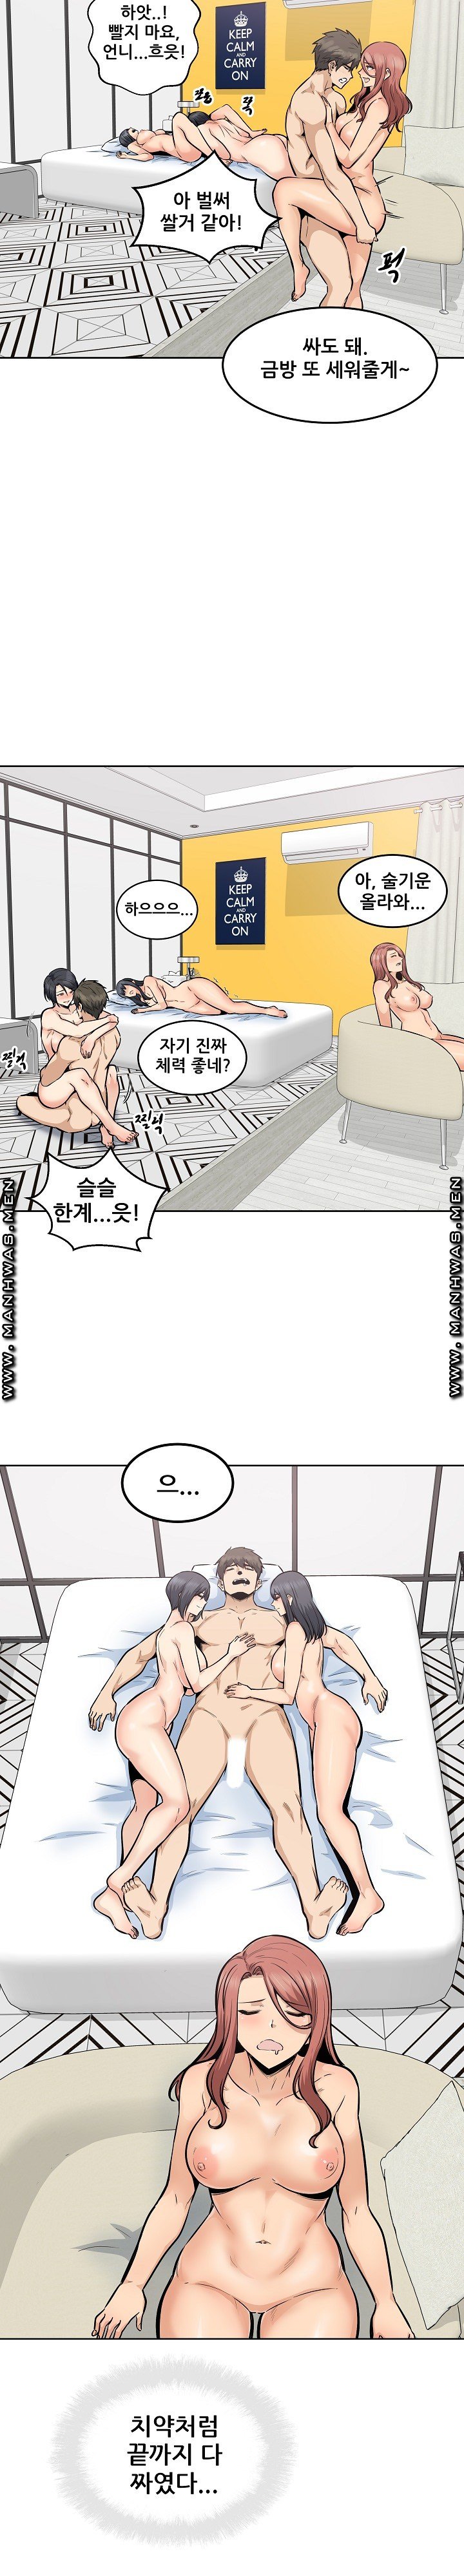 the-ark-is-me-raw-chap-87-18